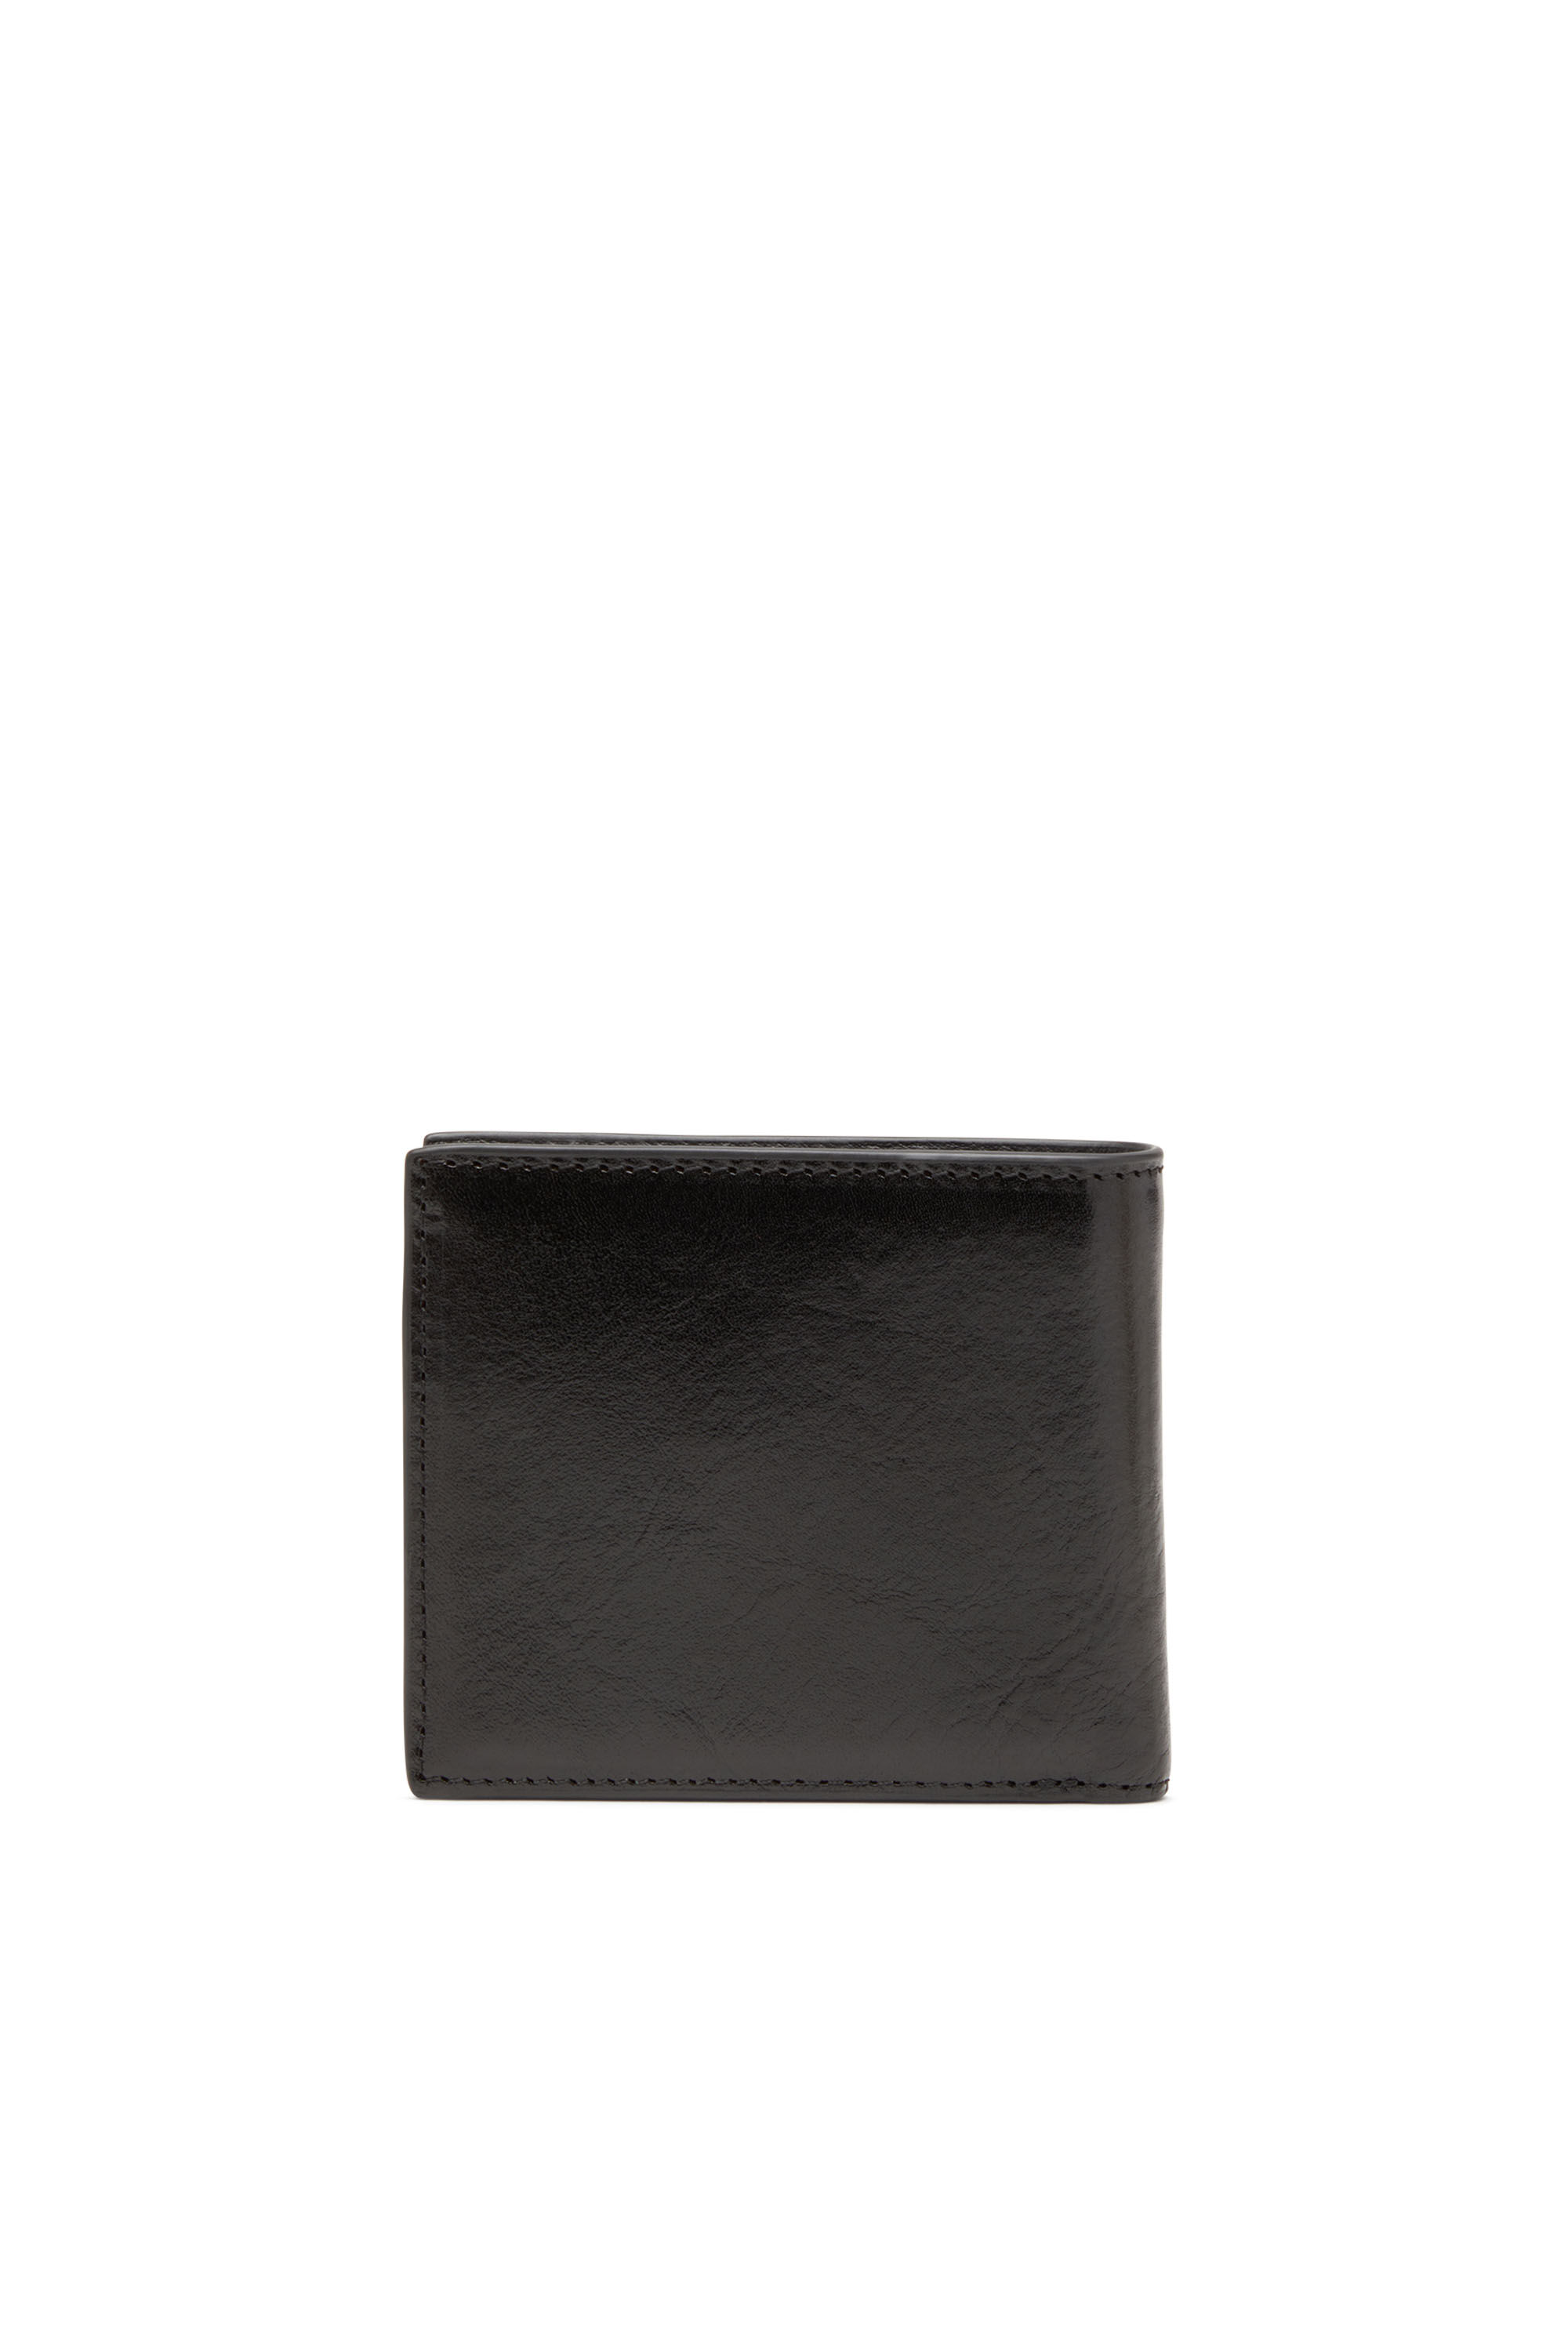 Diesel - RAVE BI-FOLD COIN S, Male Leather bi-fold wallet with red D plaque in ブラック - Image 2